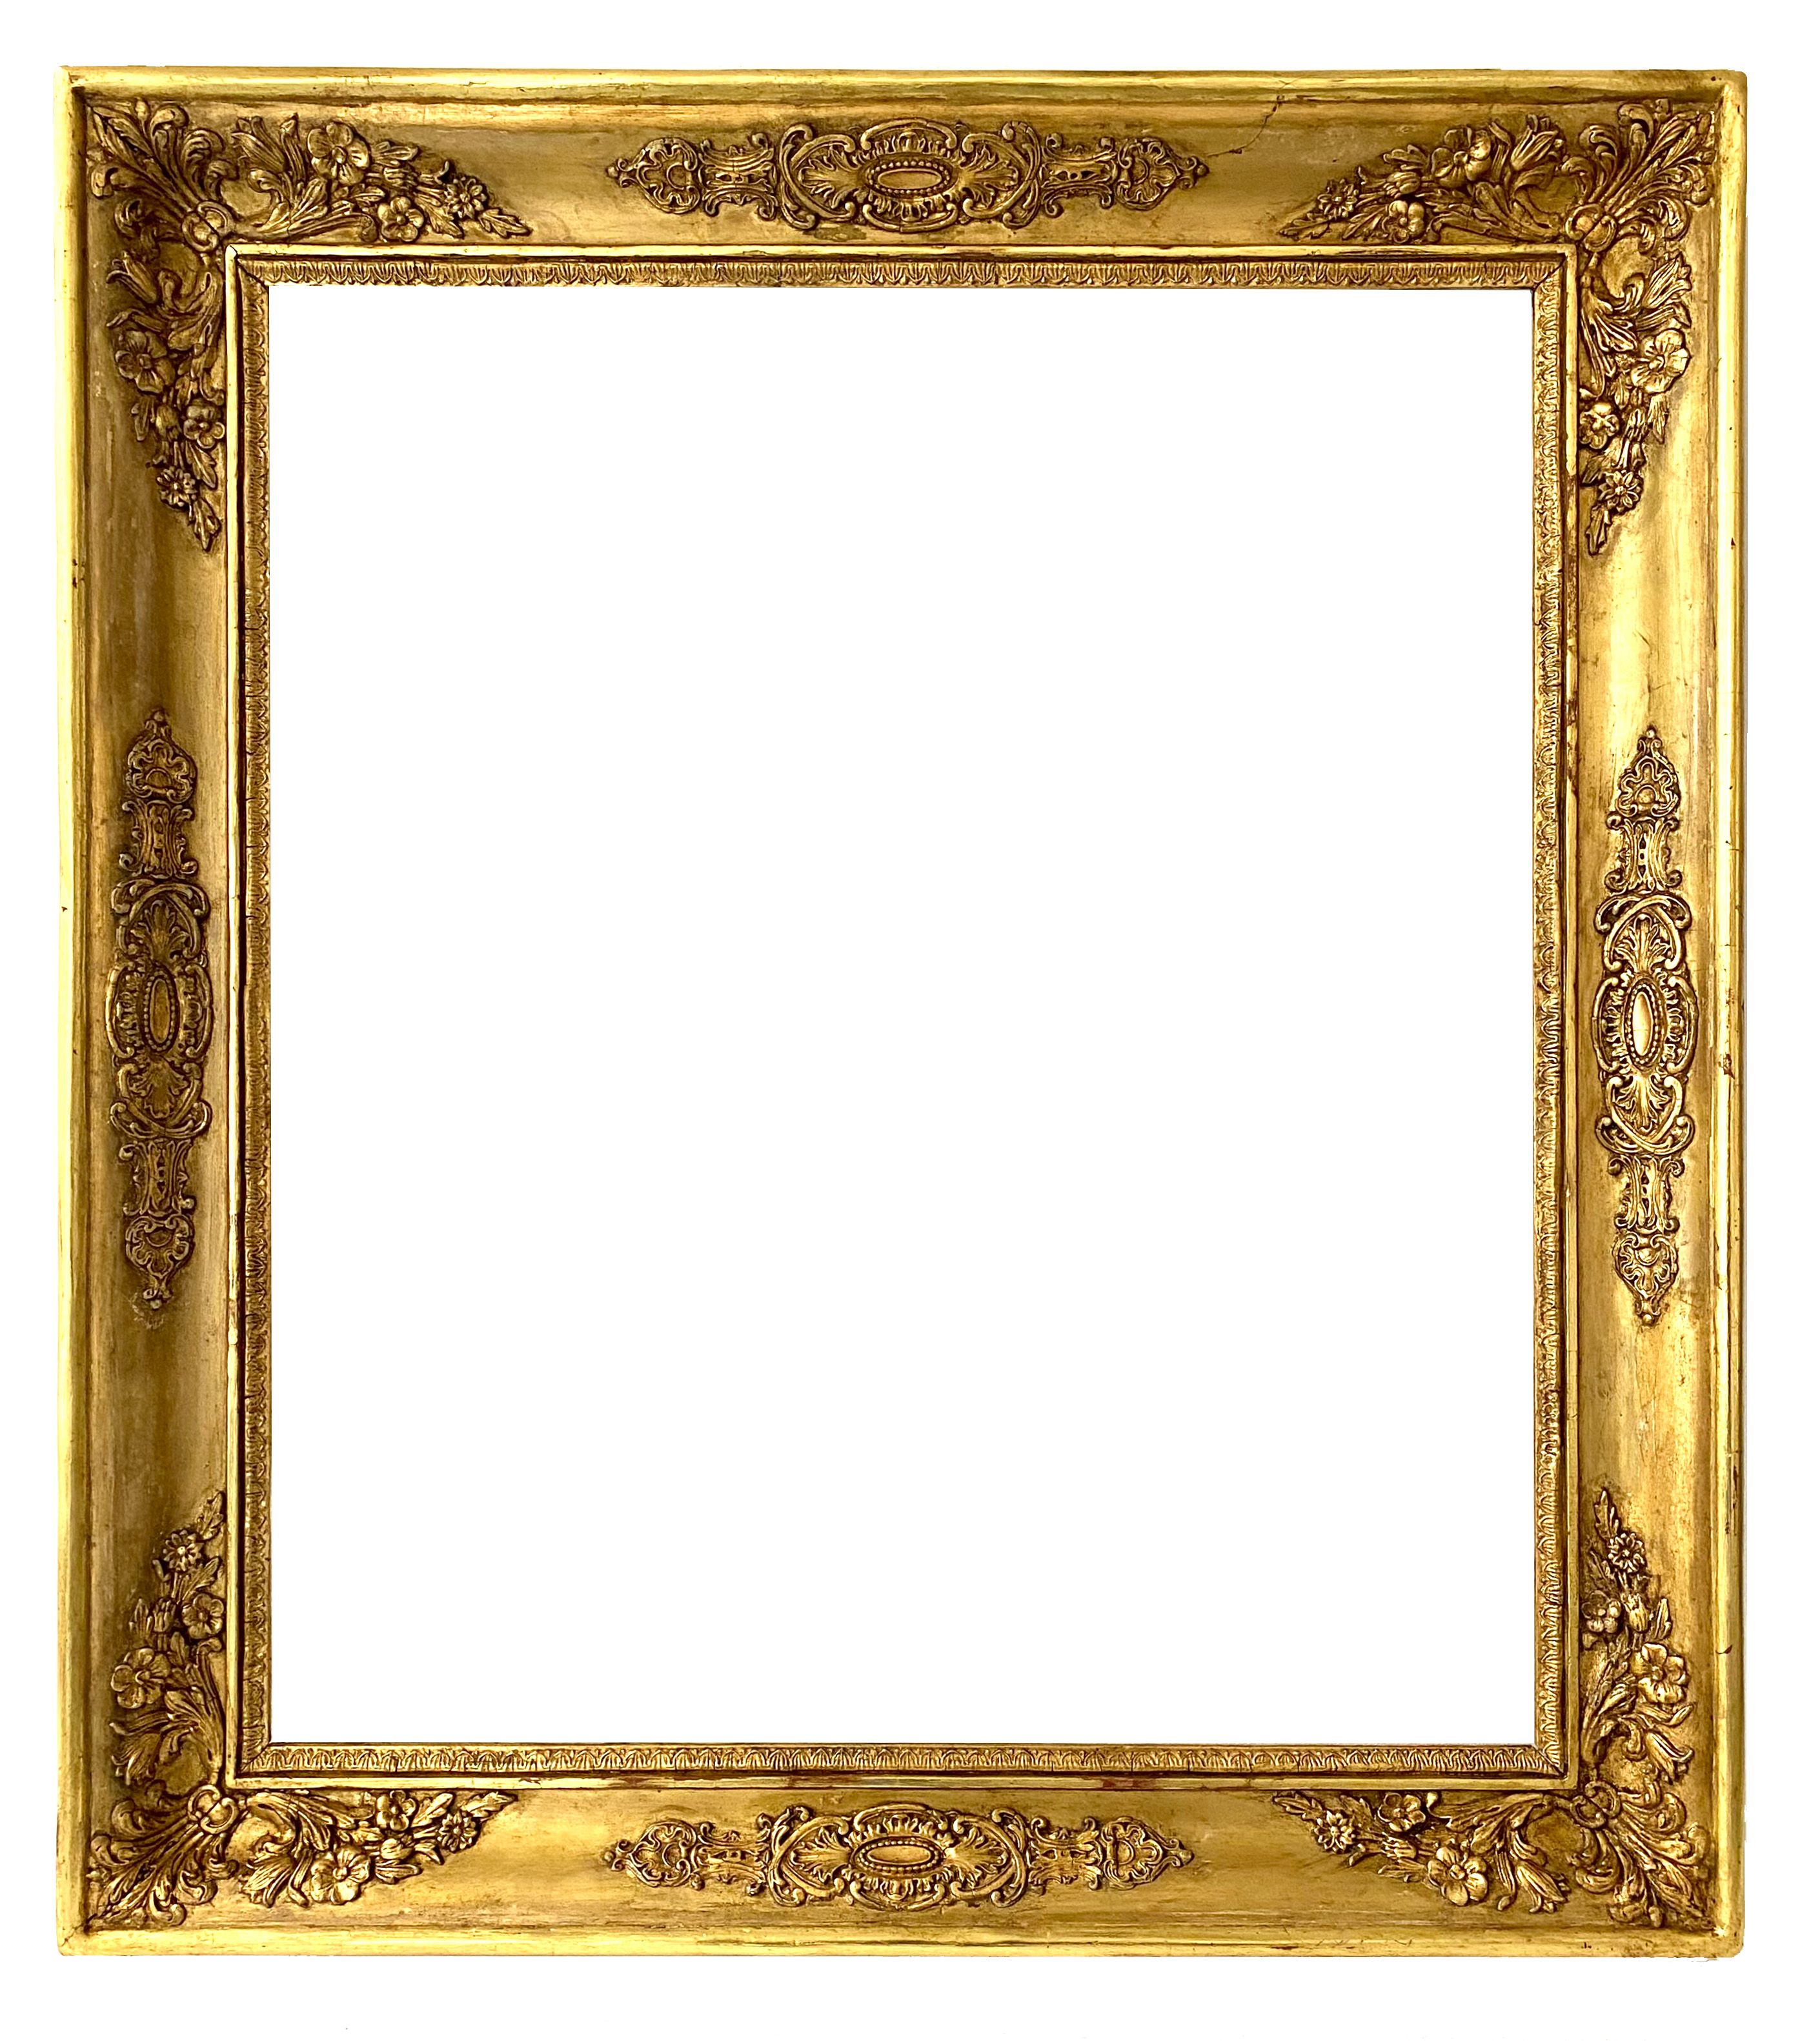 Empire style frame - 60,00 x 53,00 - REF - 385